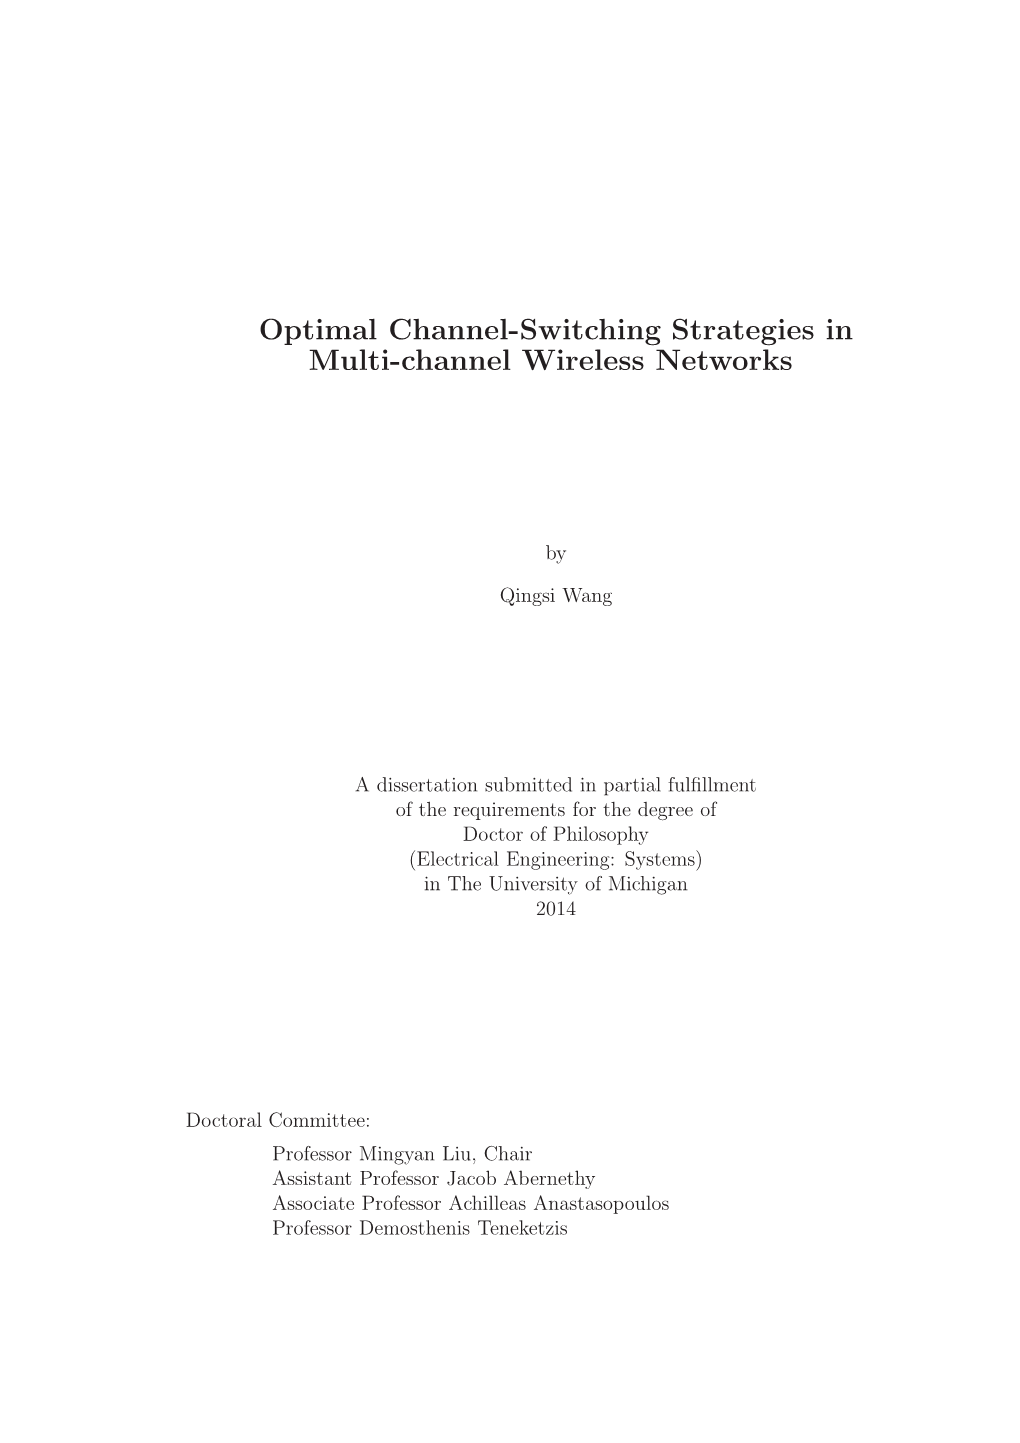 Optimal Channel-Switching Strategies in Multi-Channel Wireless Networks